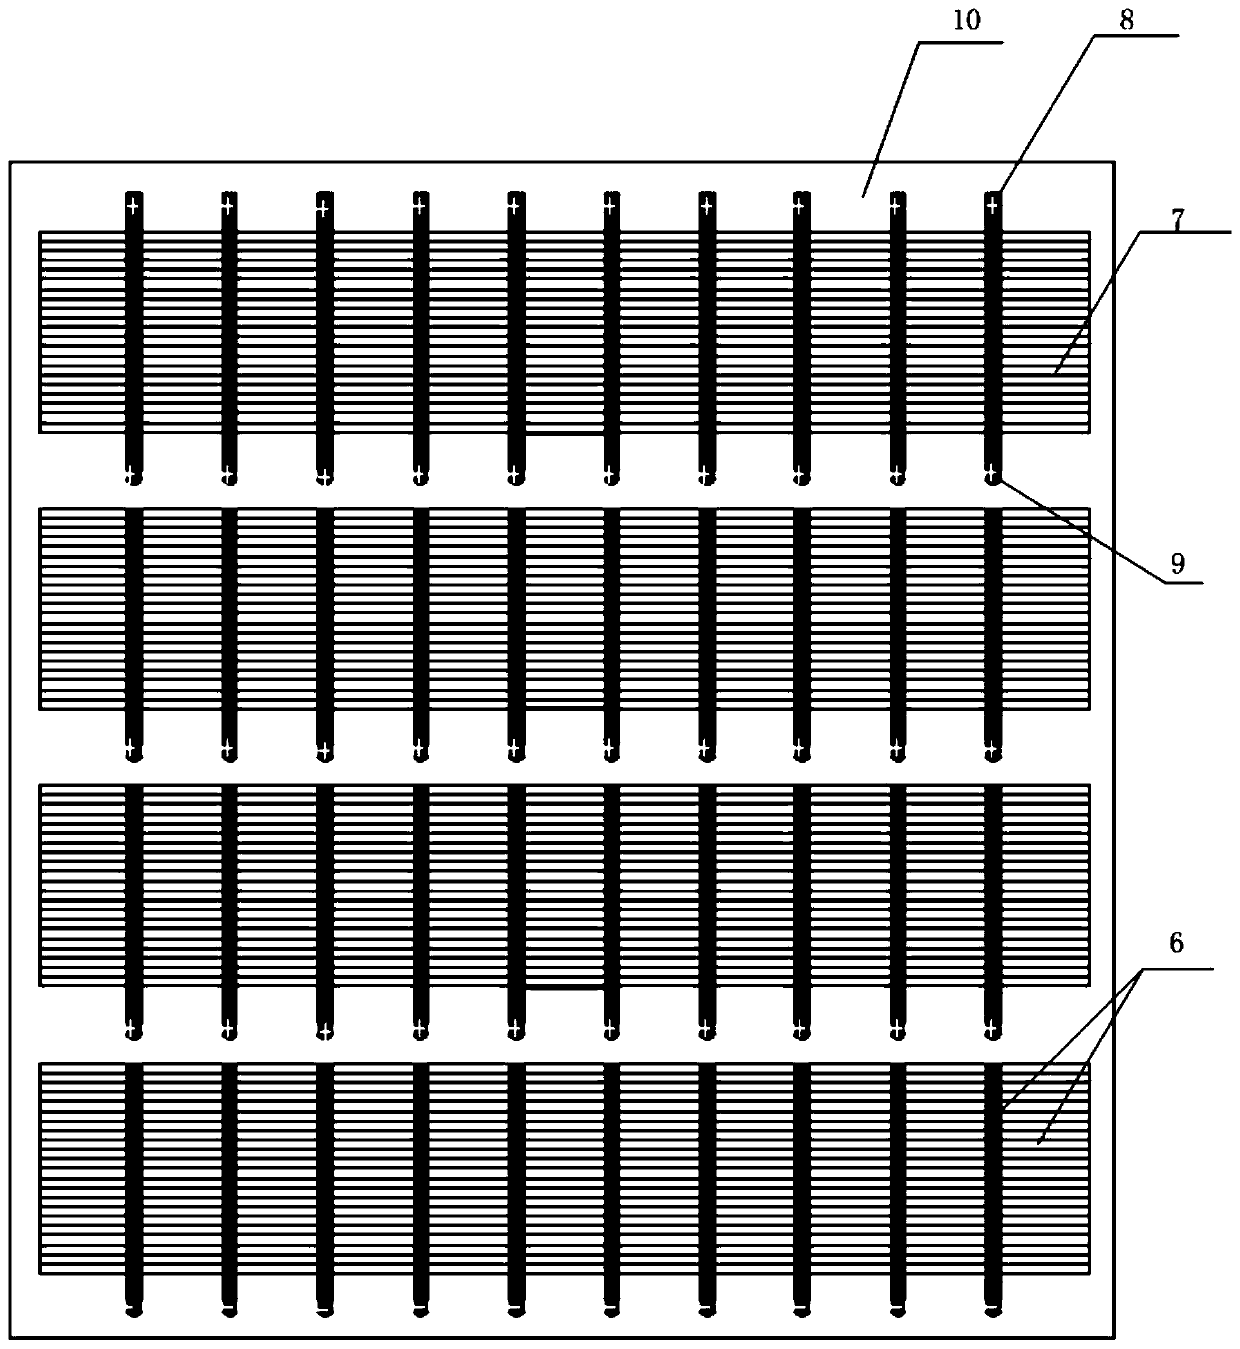 Water-blocking front plate integrated with solar cell interconnection and processing method thereof